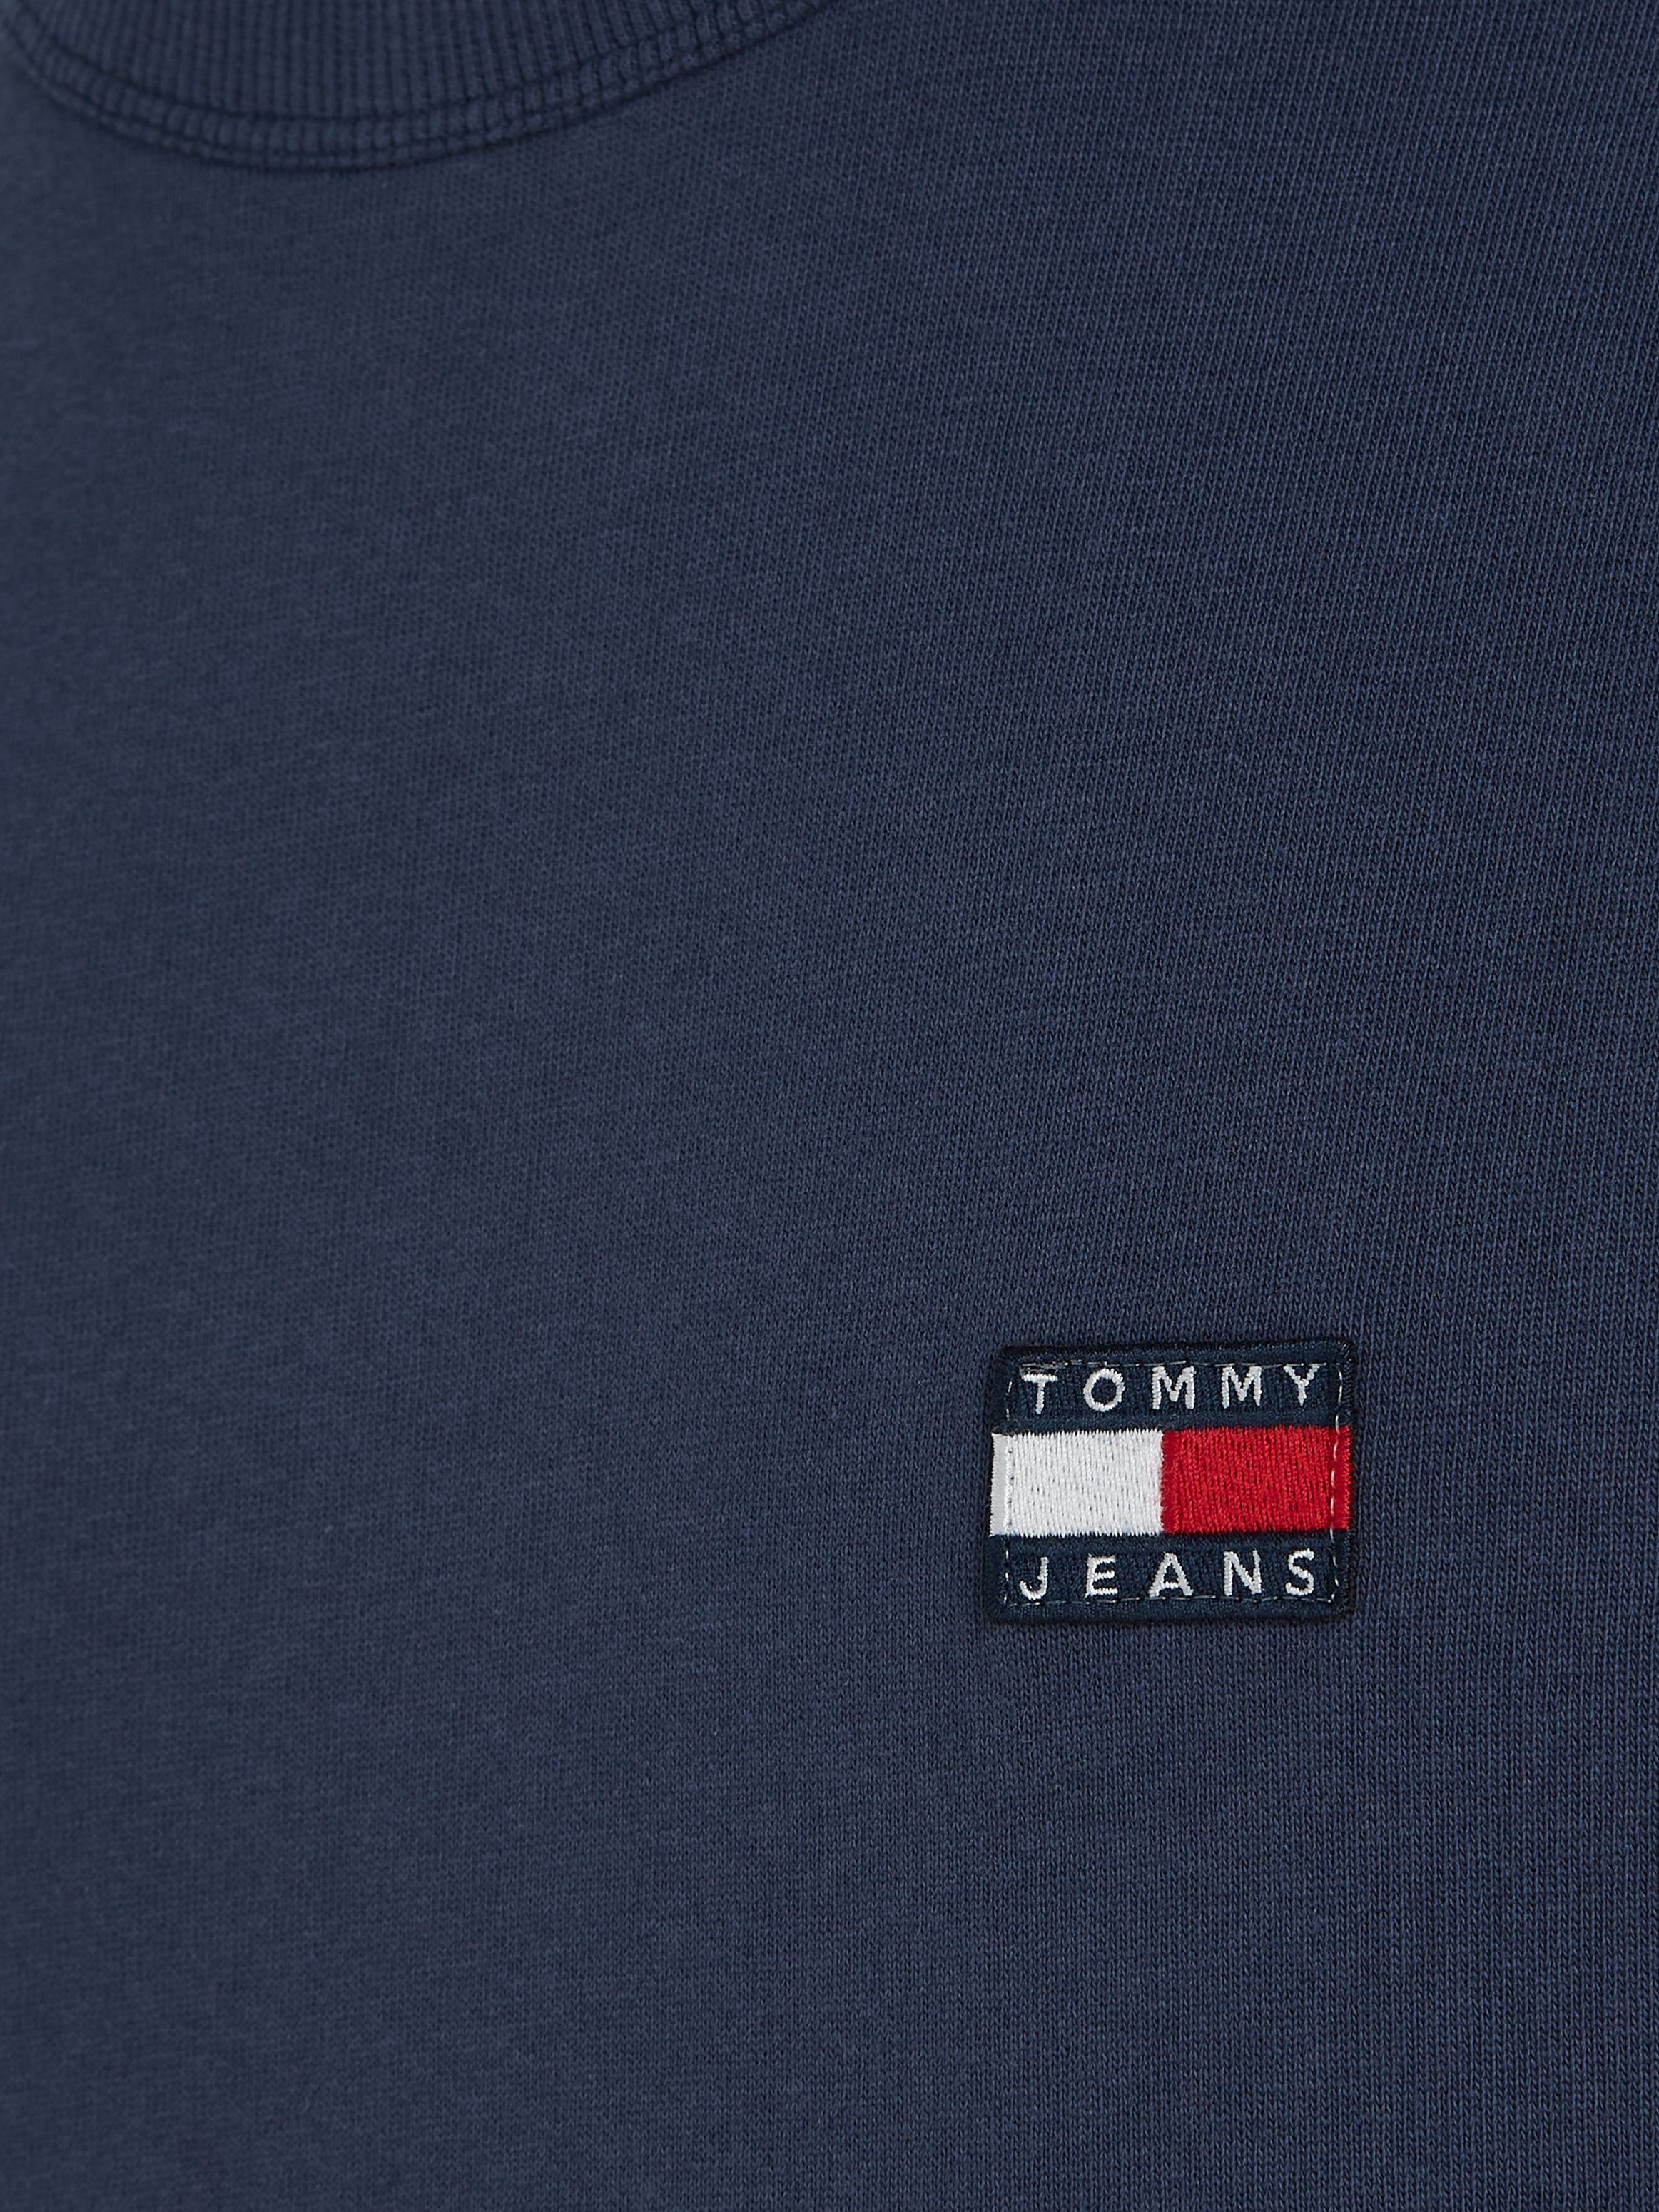 Jeans XS TOMMY Navy BADGE Twilight CLSC Tommy TJM T-Shirt TEE